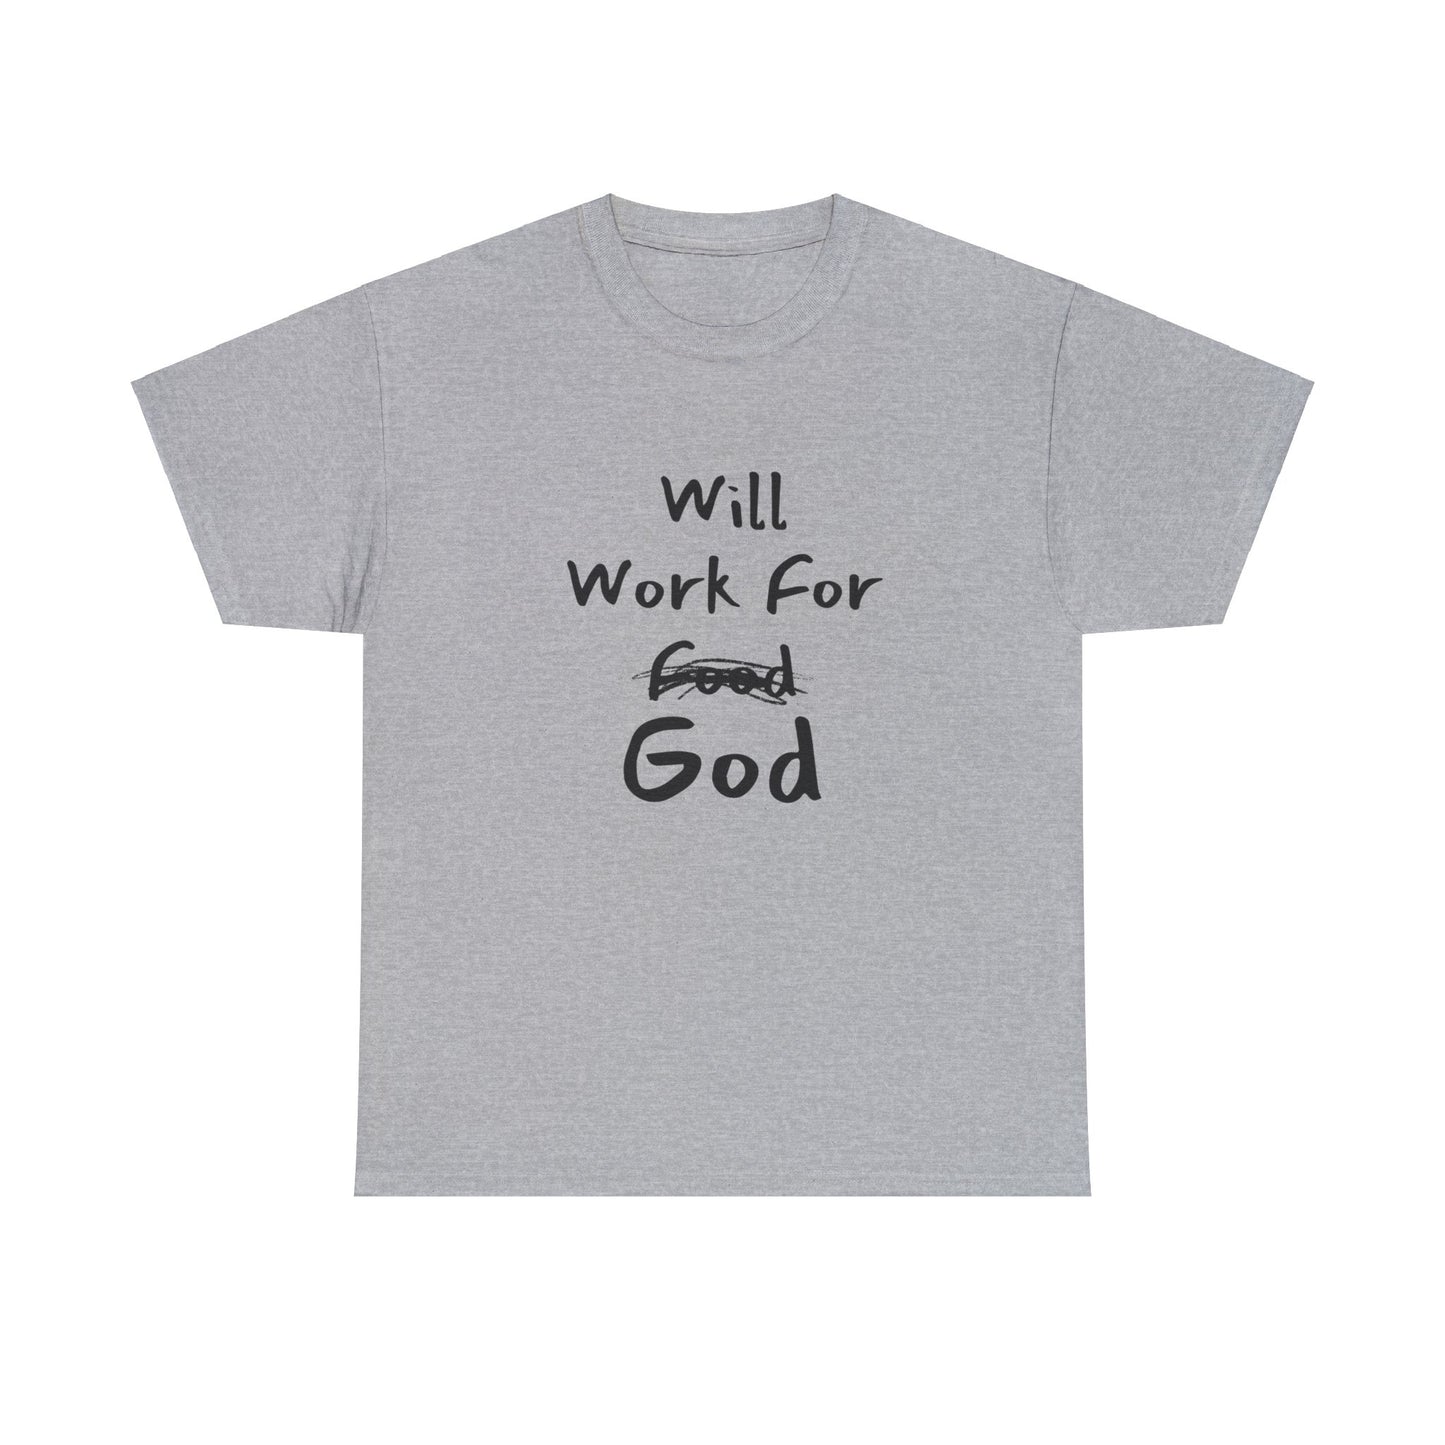 "Religious statement shirt Will Work For God for believers."